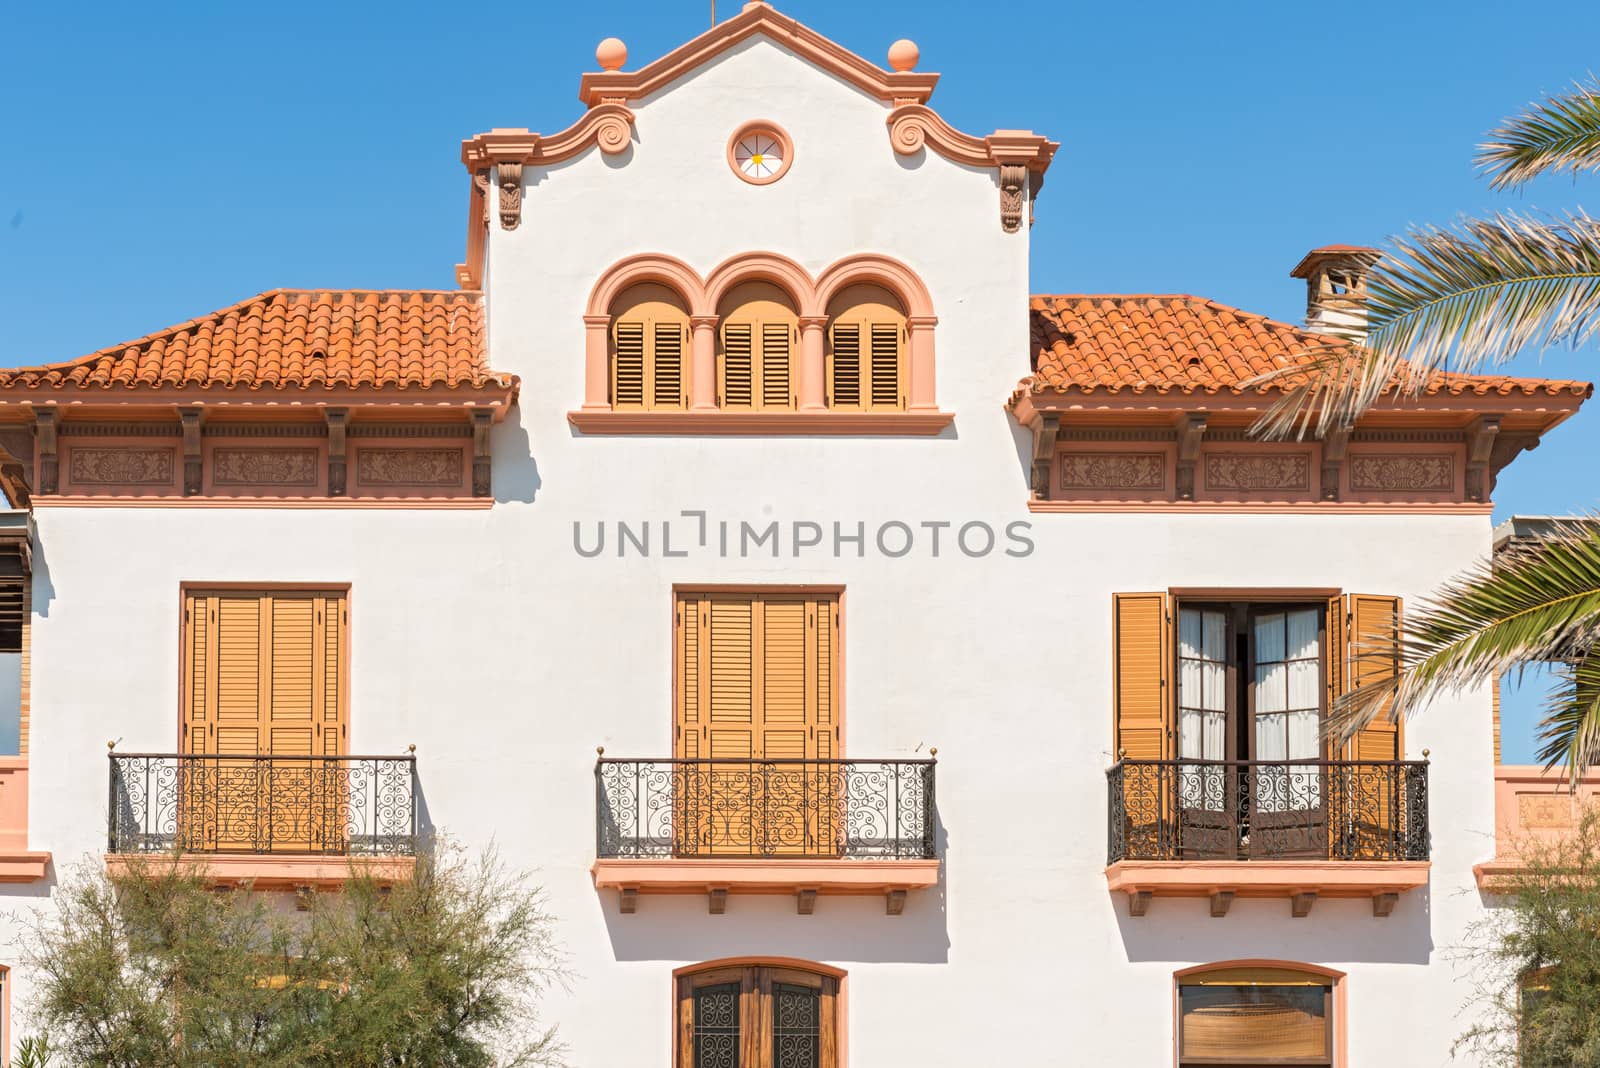 Sitges, Spain - September 21, 2013: Facade view at old  house in Sitges, Spain. The town is major tourist place during the summer.